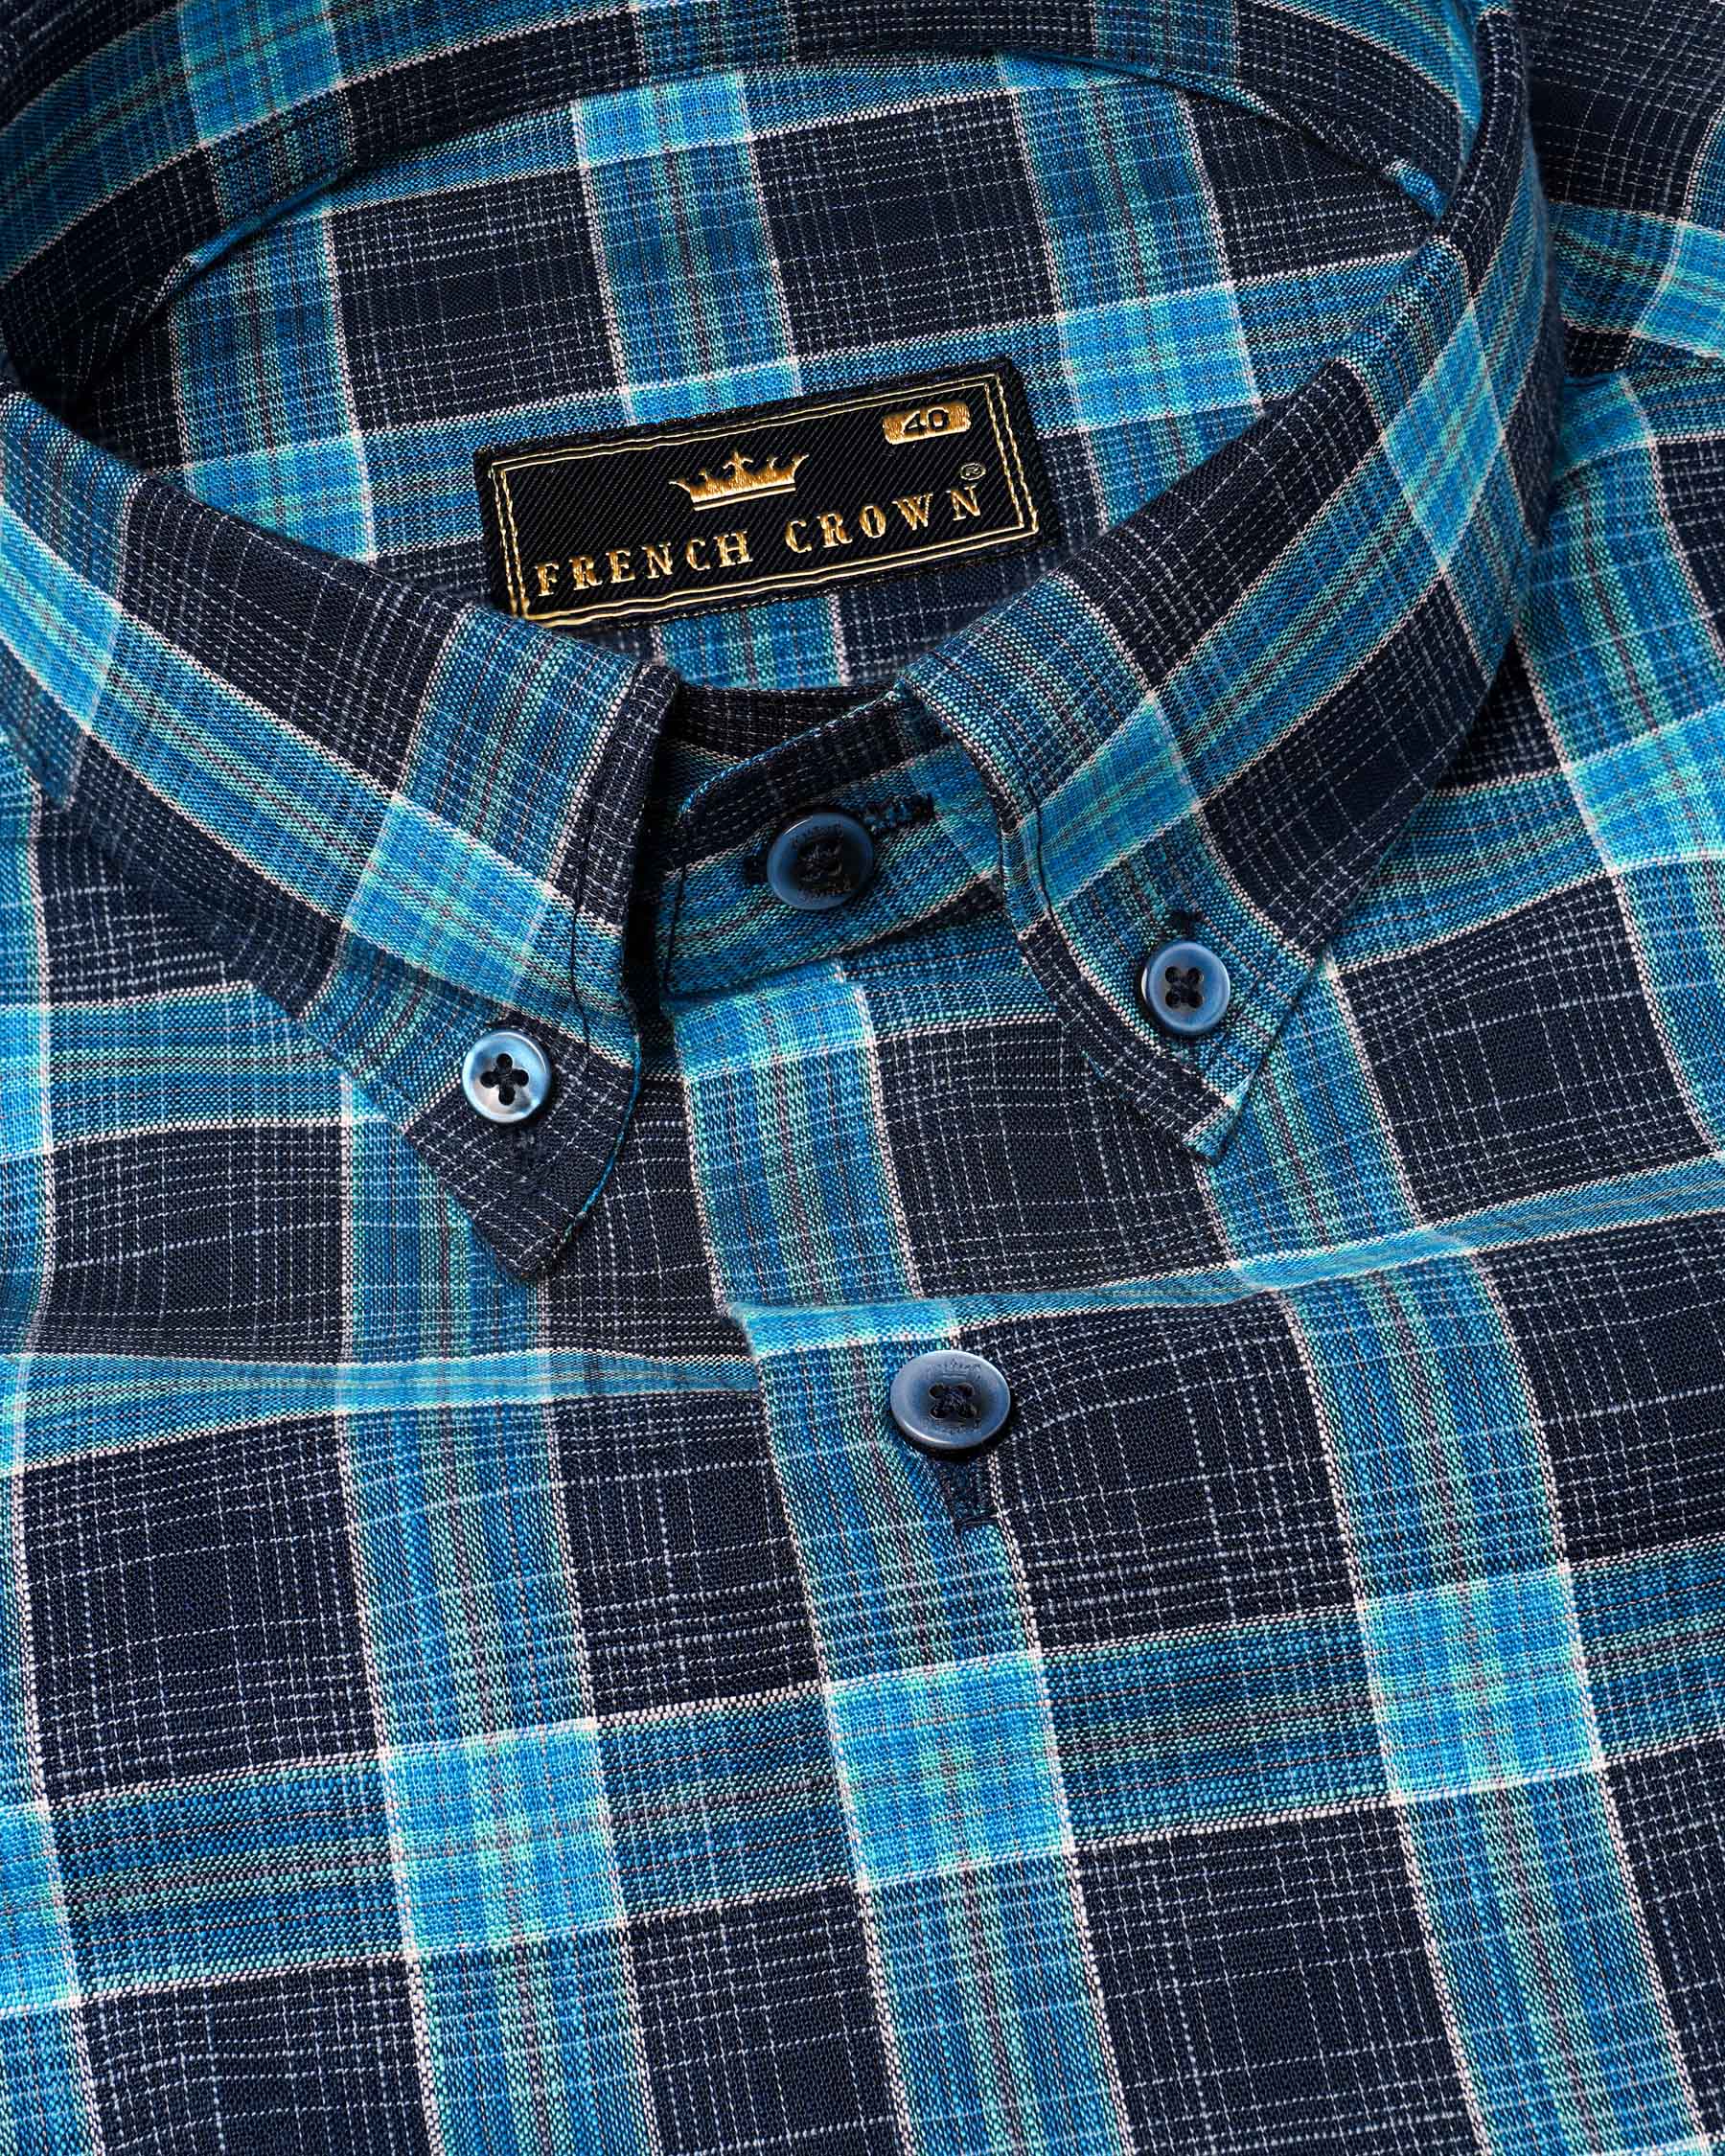 Mirage Navy Blue and Pacific Blue Plaid Dobby Textured Premium Giza Cotton Shirt 7701-BD-BLE-38, 7701-BD-BLE-H-38, 7701-BD-BLE-39,7701-BD-BLE-H-39, 7701-BD-BLE-40, 7701-BD-BLE-H-40, 7701-BD-BLE-42, 7701-BD-BLE-H-42, 7701-BD-BLE-44, 7701-BD-BLE-H-44, 7701-BD-BLE-46, 7701-BD-BLE-H-46, 7701-BD-BLE-48, 7701-BD-BLE-H-48, 7701-BD-BLE-50, 7701-BD-BLE-H-50, 7701-BD-BLE-52, 7701-BD-BLE-H-52